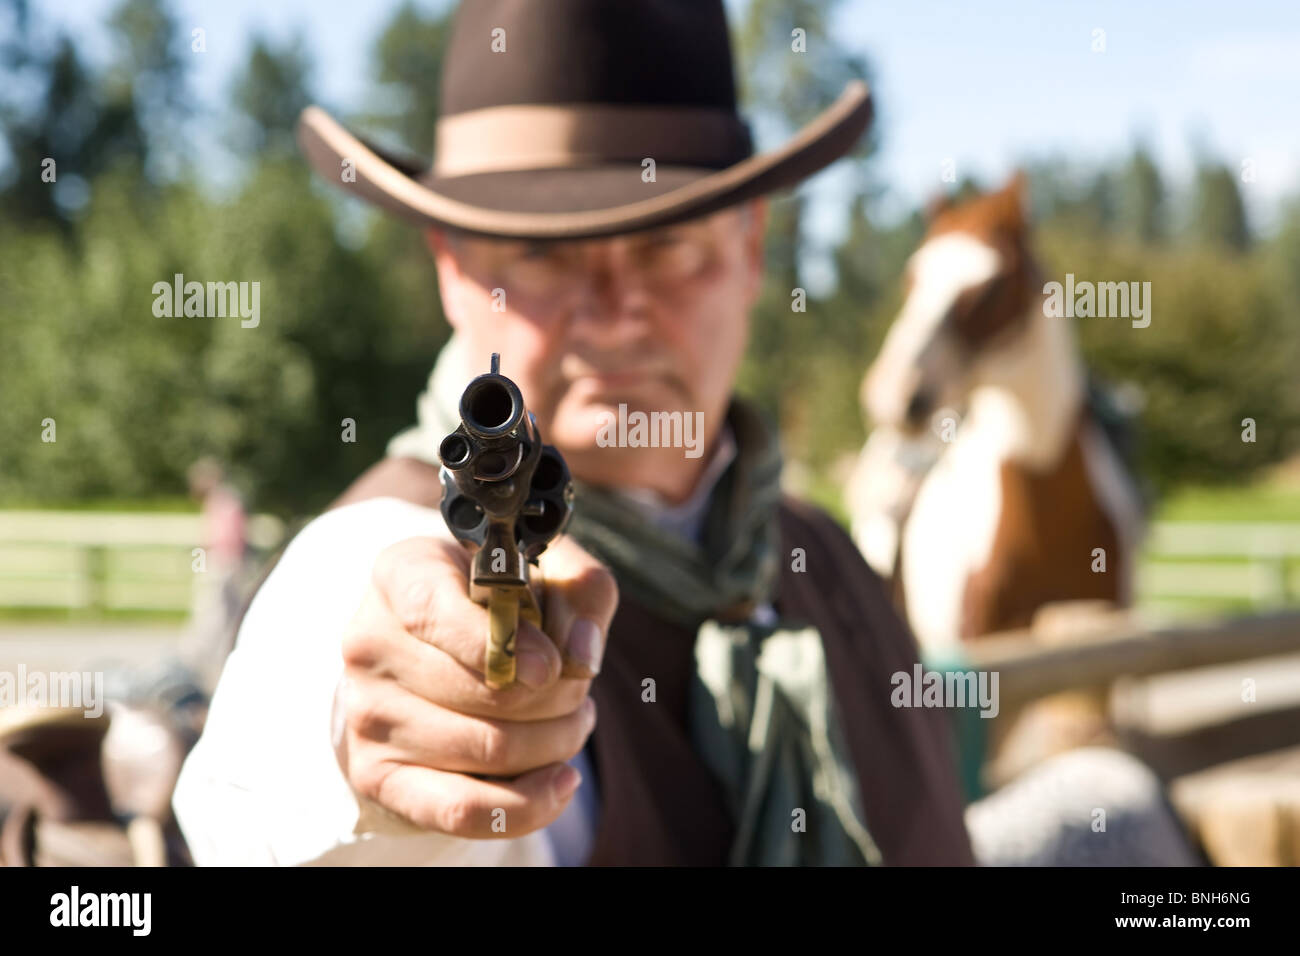 Cowboy aiming gun, focus only on gunpoint, horse in background Stock Photo